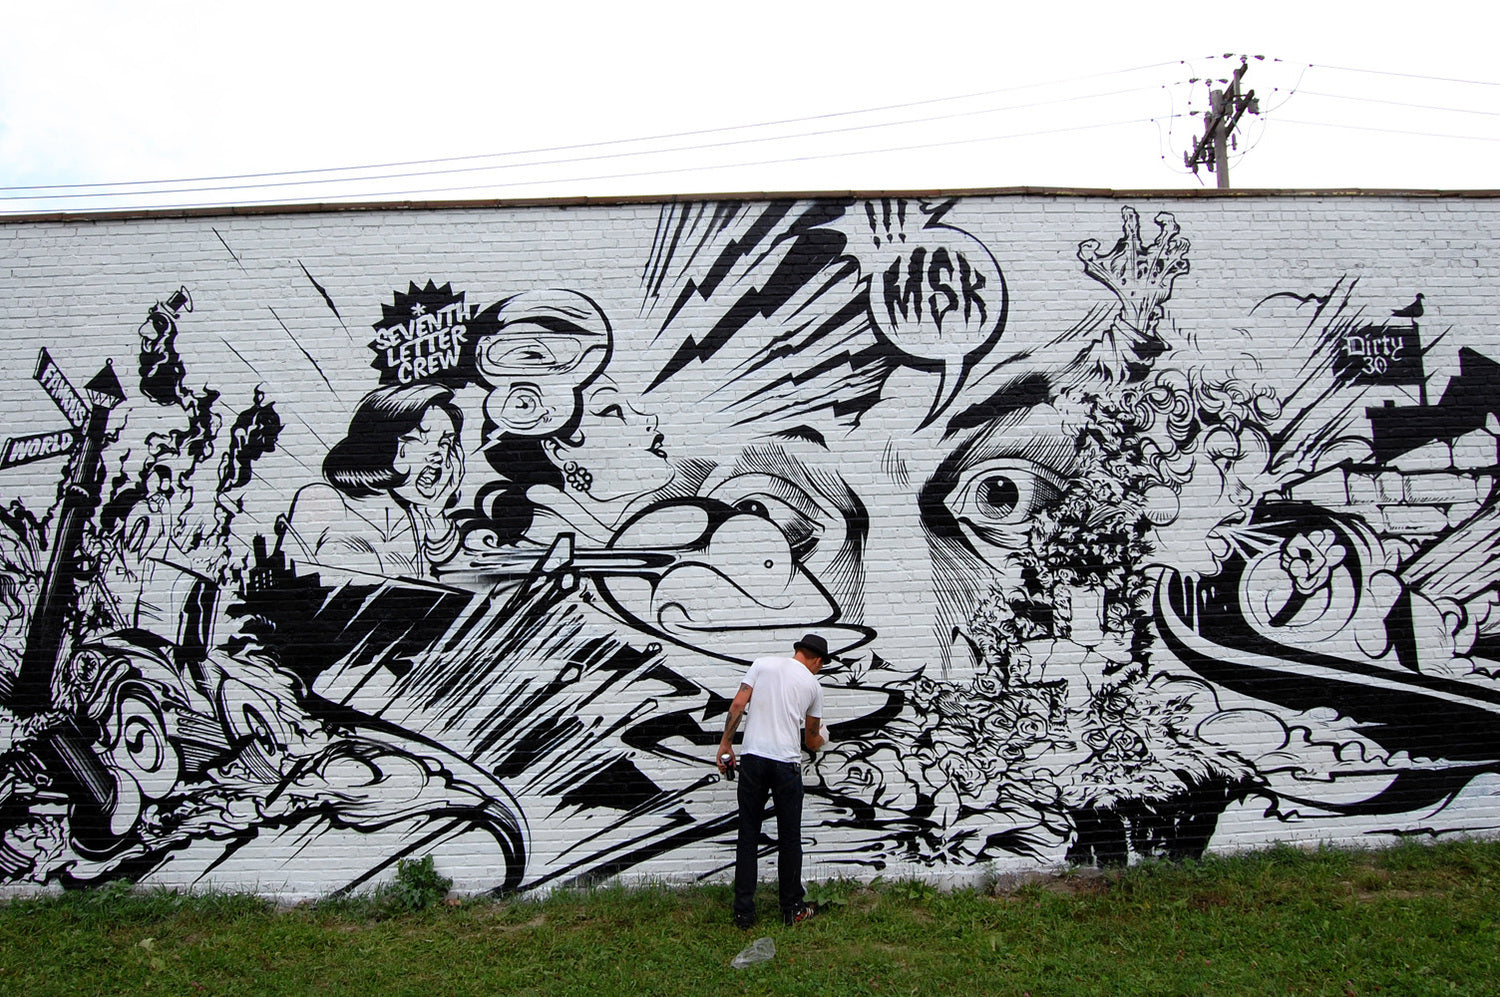 Spray Planet Artist Feature: Pose One